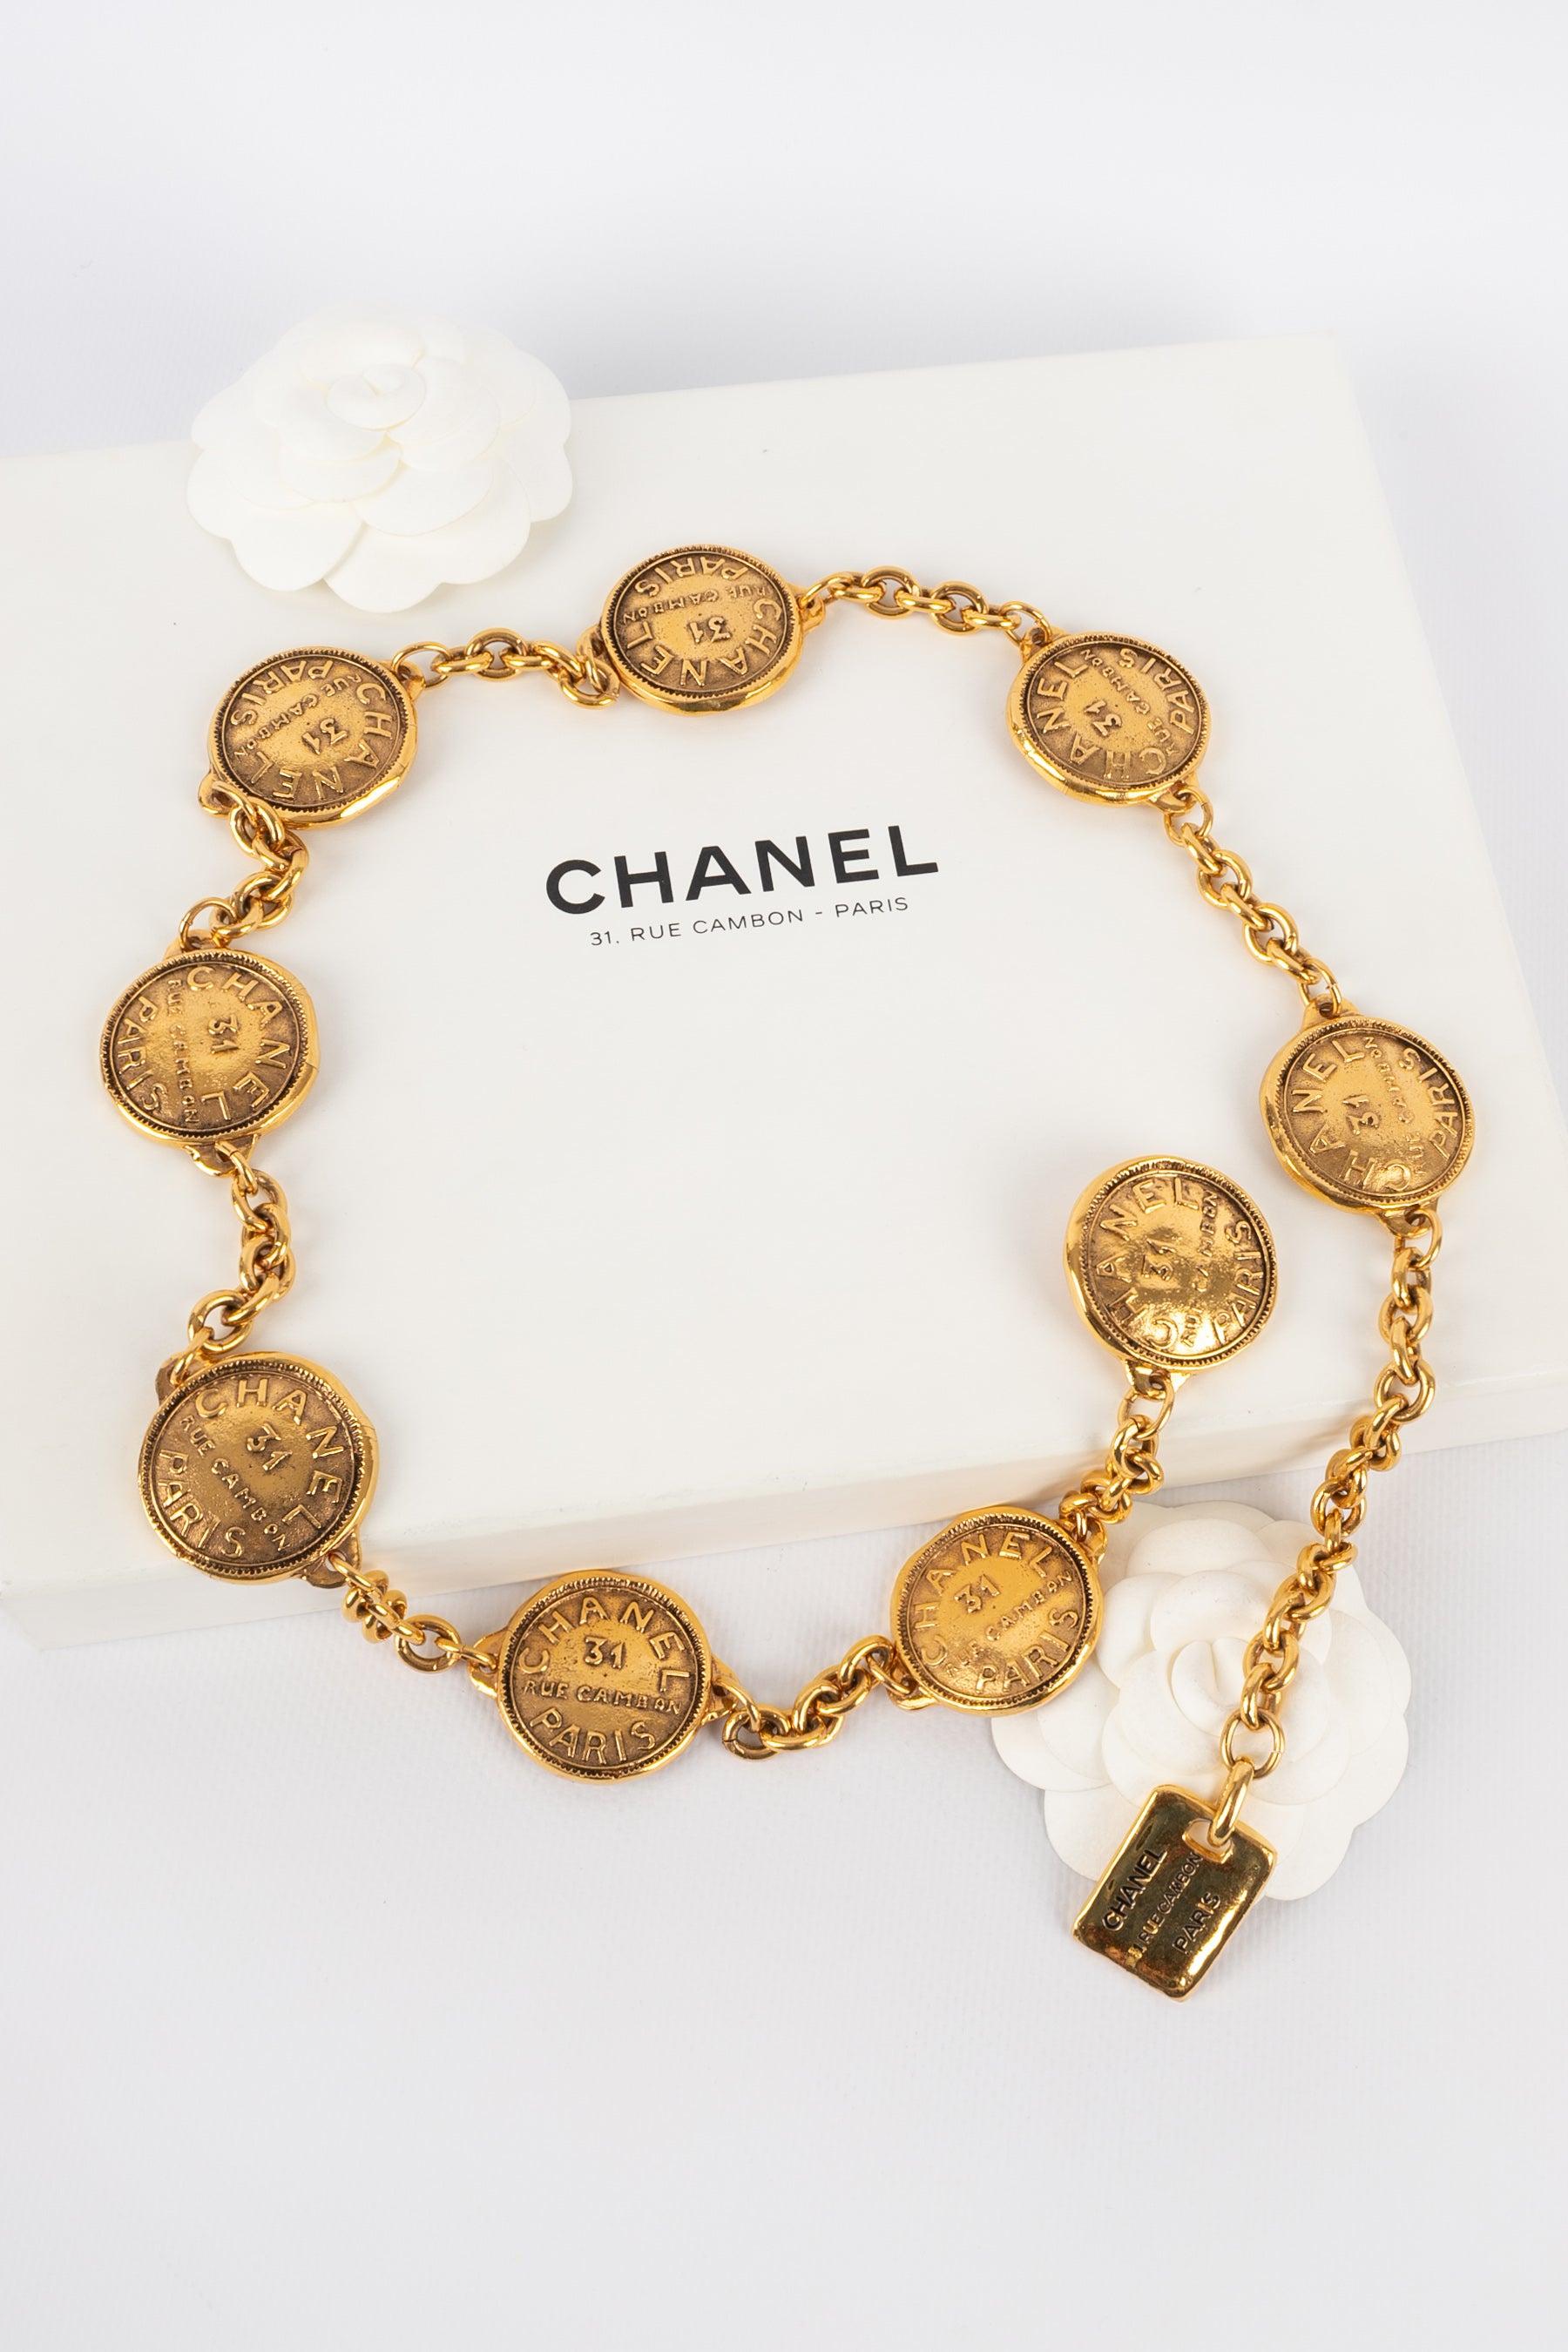 Chanel Belt of Chains and Medallions Representing Coins, 1980s 5